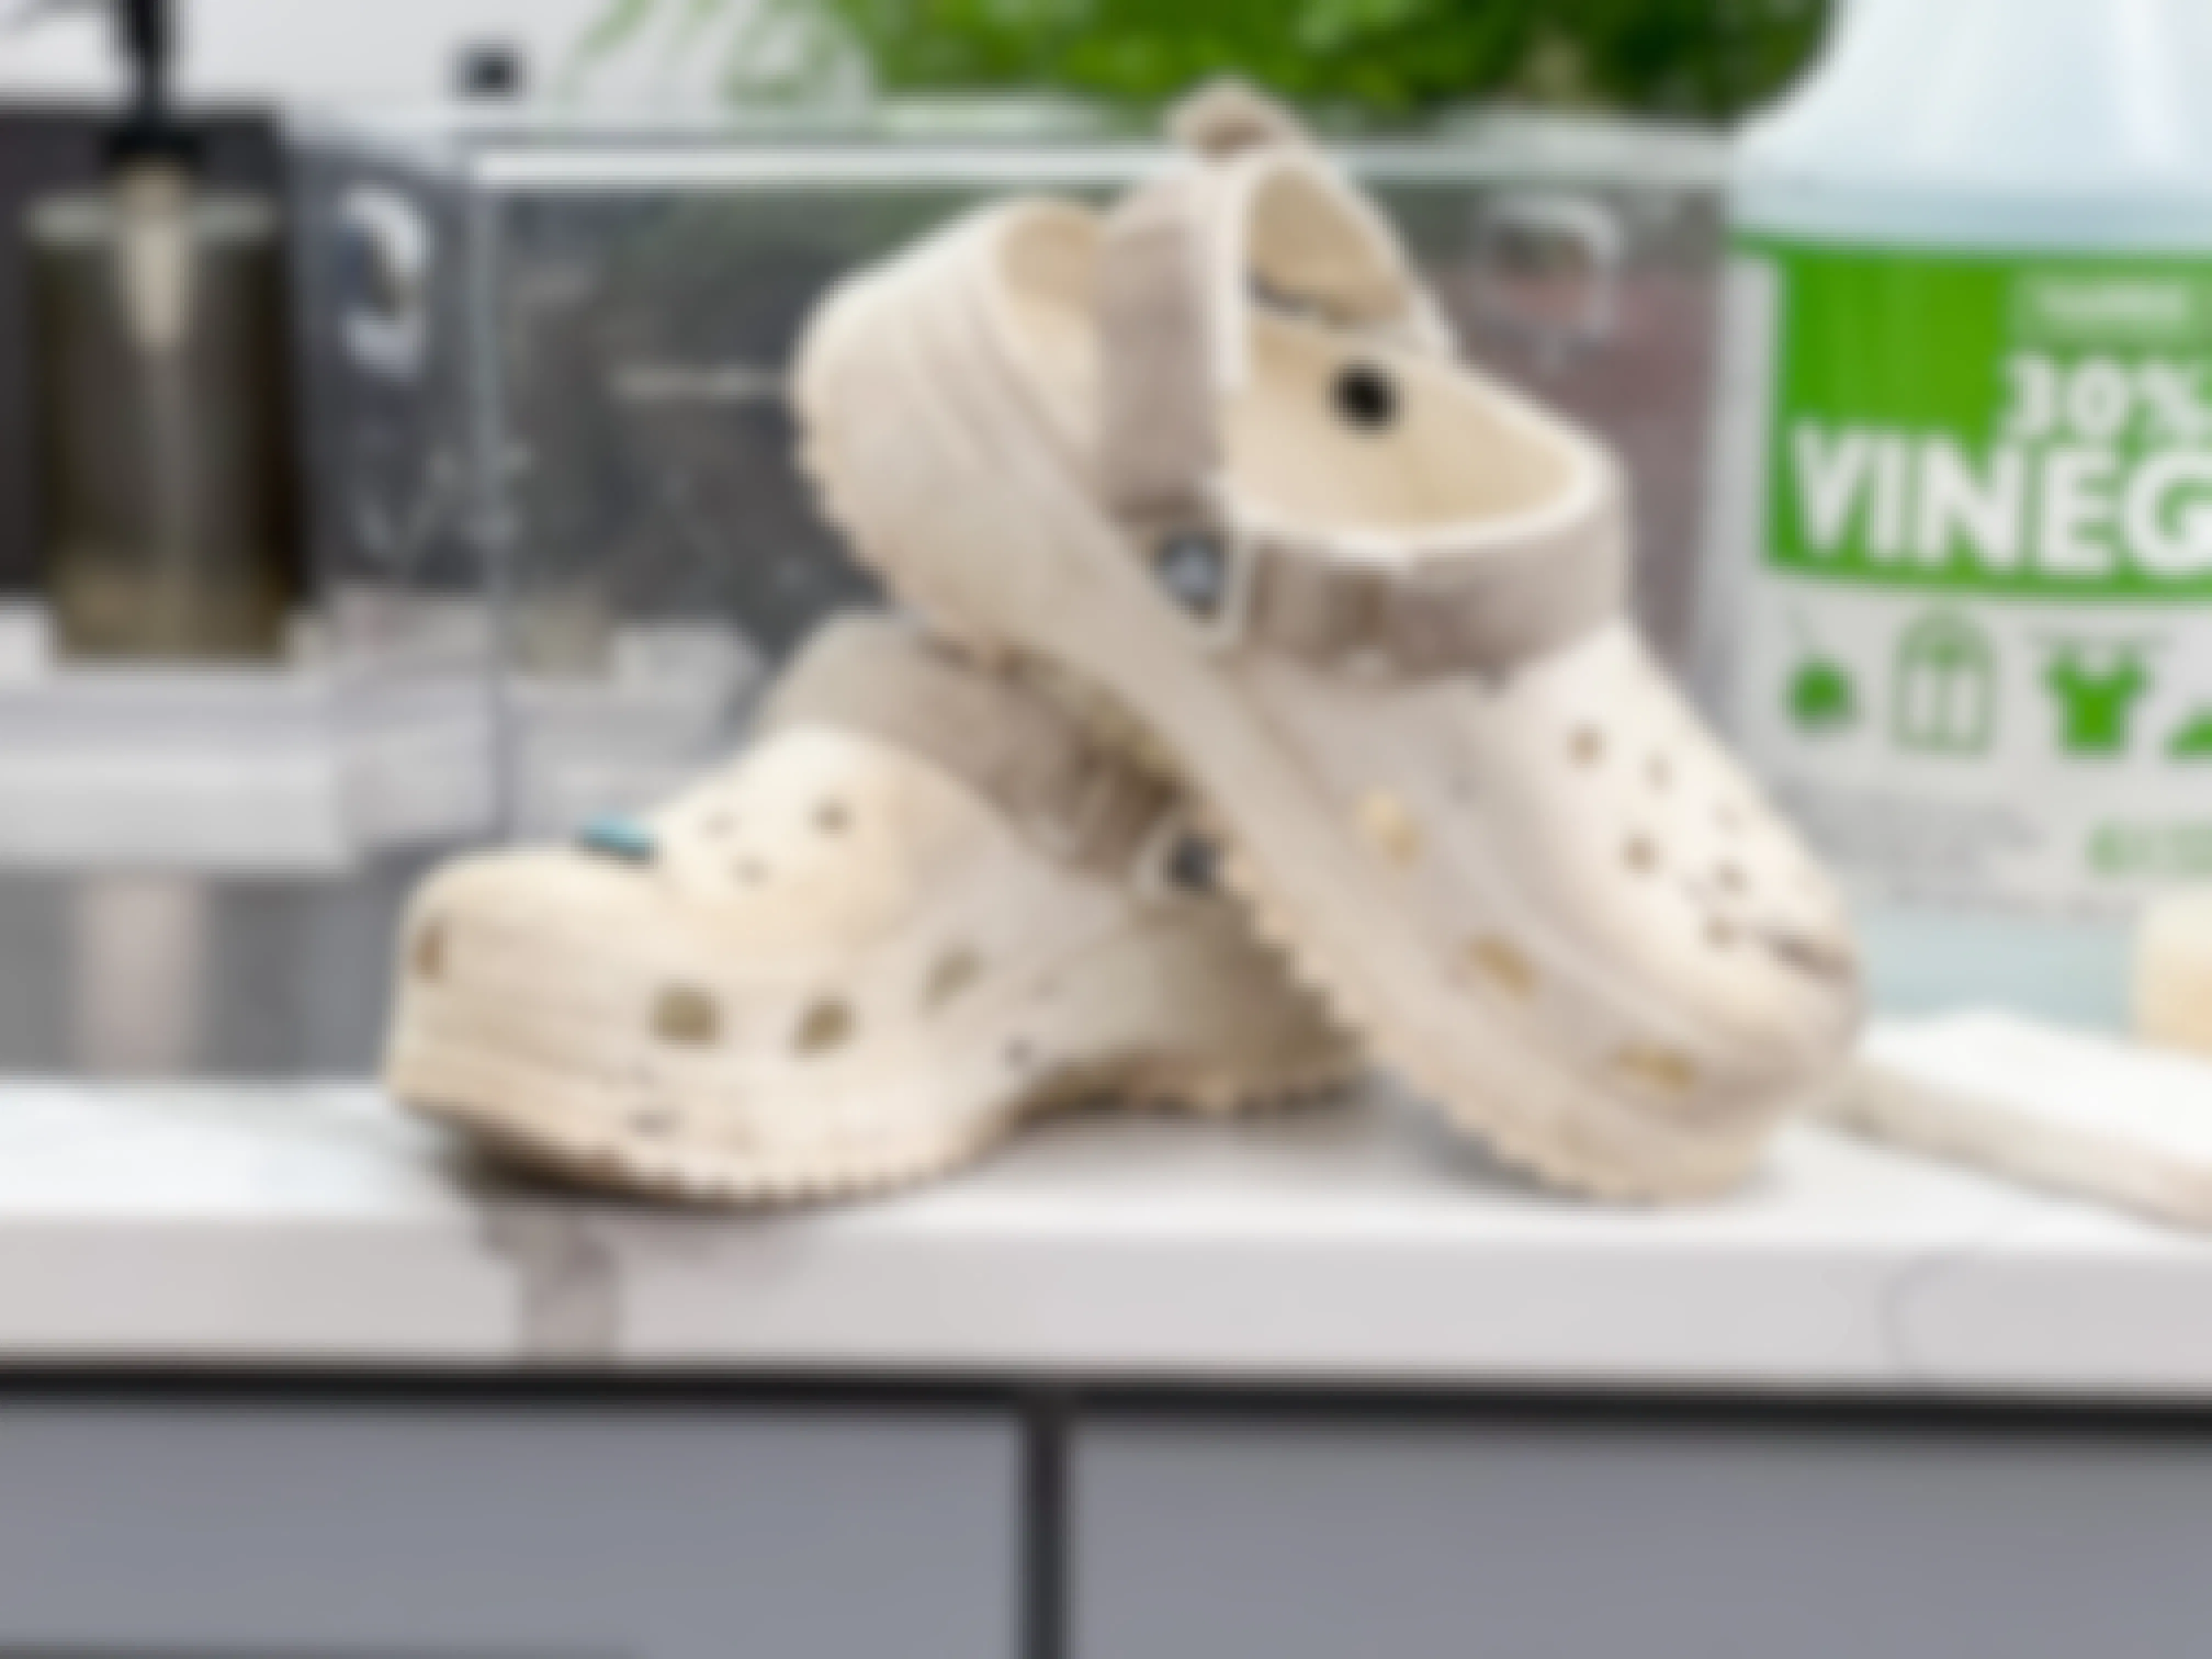 A pair of dirty Crocs on a counter next to a sink.